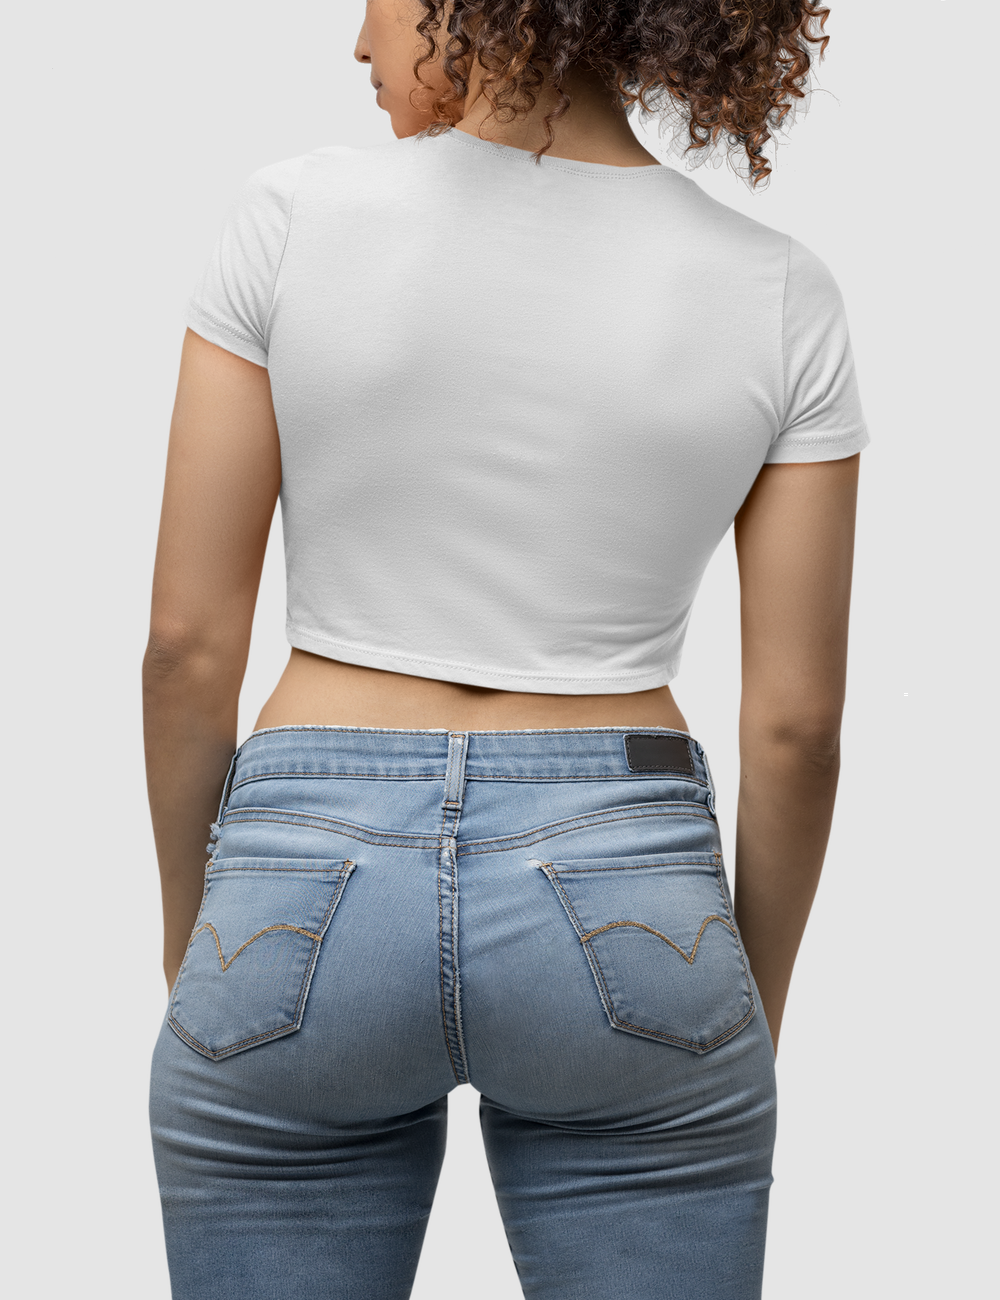 Los Angeles 2029 A.D. Women's Fitted Crop Top T-Shirt OniTakai